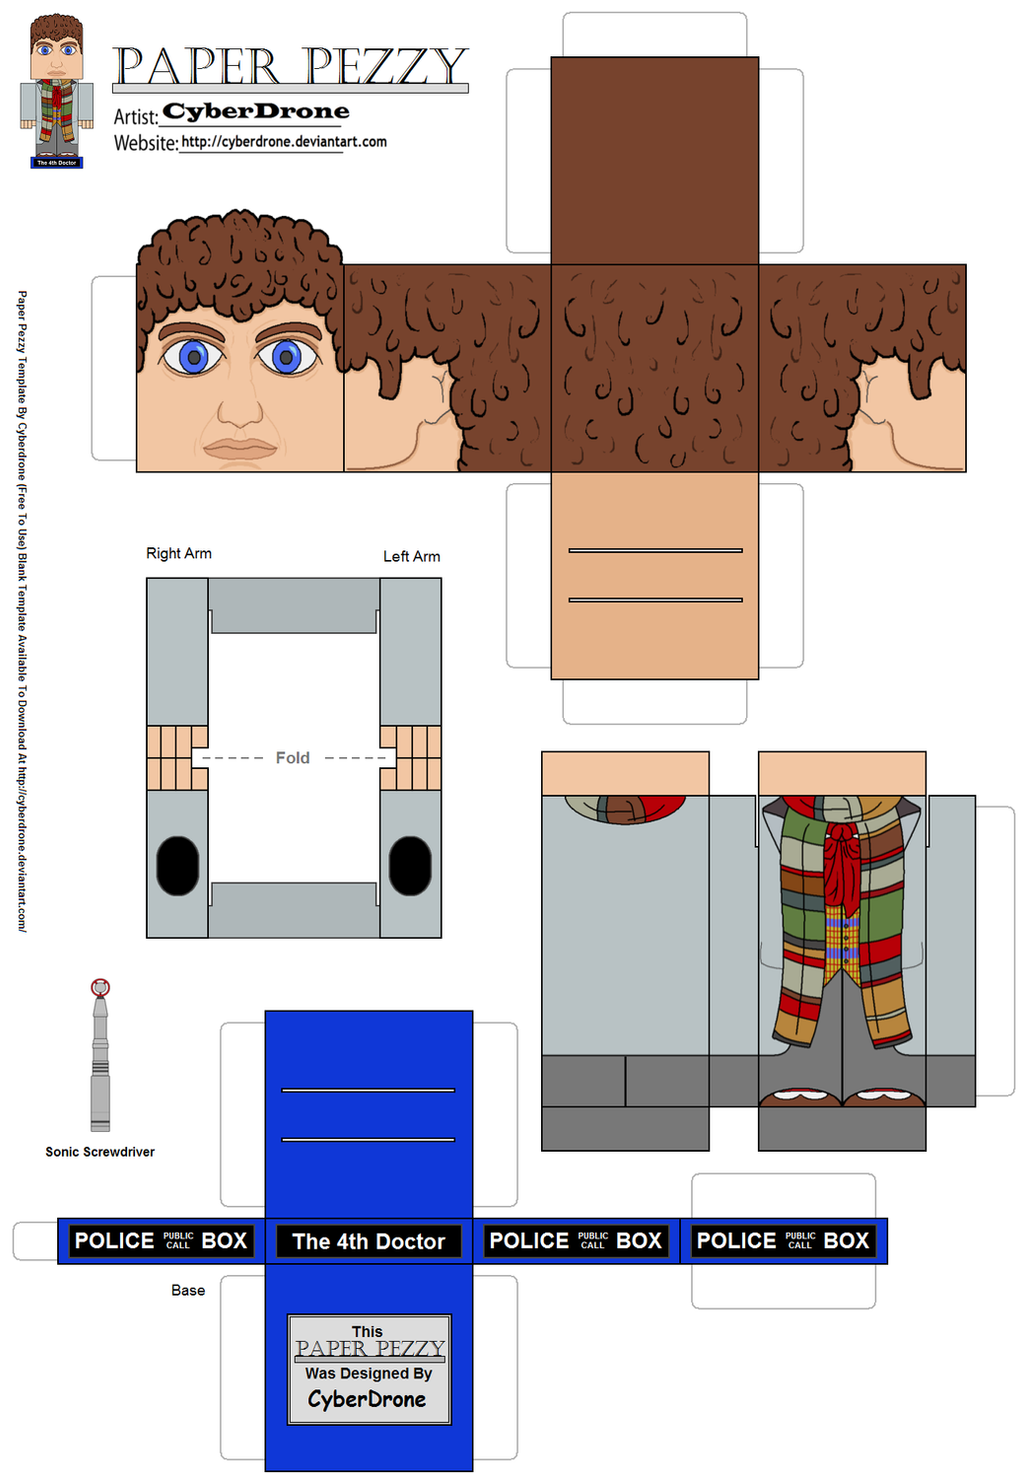 Paper Pezzy- The 4th Doctor by CyberDrone on DeviantArt